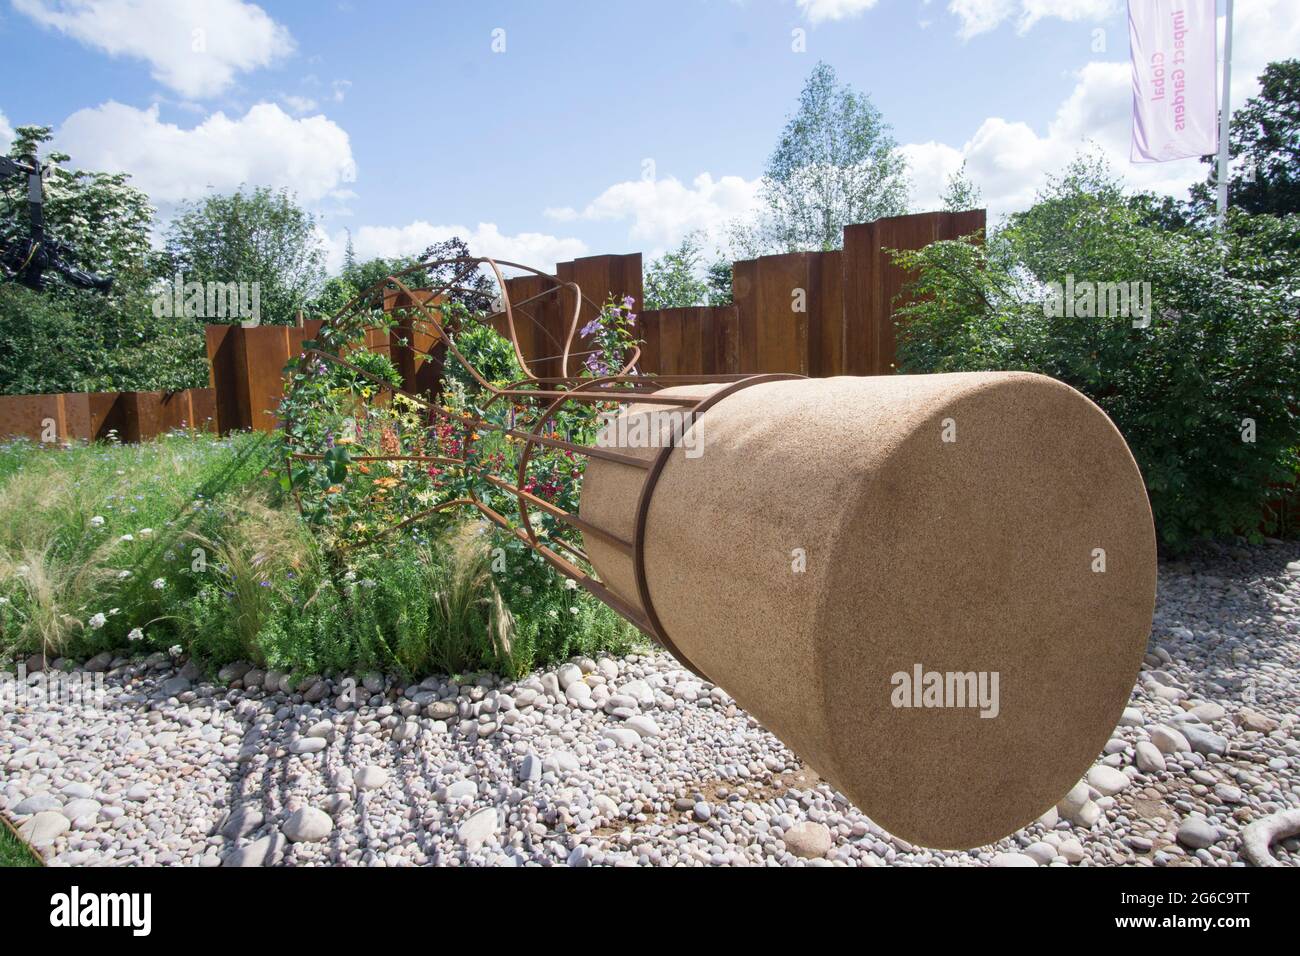 Hampton Court, England, 2 July 2021: Bill Bailey on the Canal and Rivers Trust show garden with it's message in a bottle. He is supporting their campaign against plastic pollution and littering. Rachel Royse/Alamy Live News Stock Photo